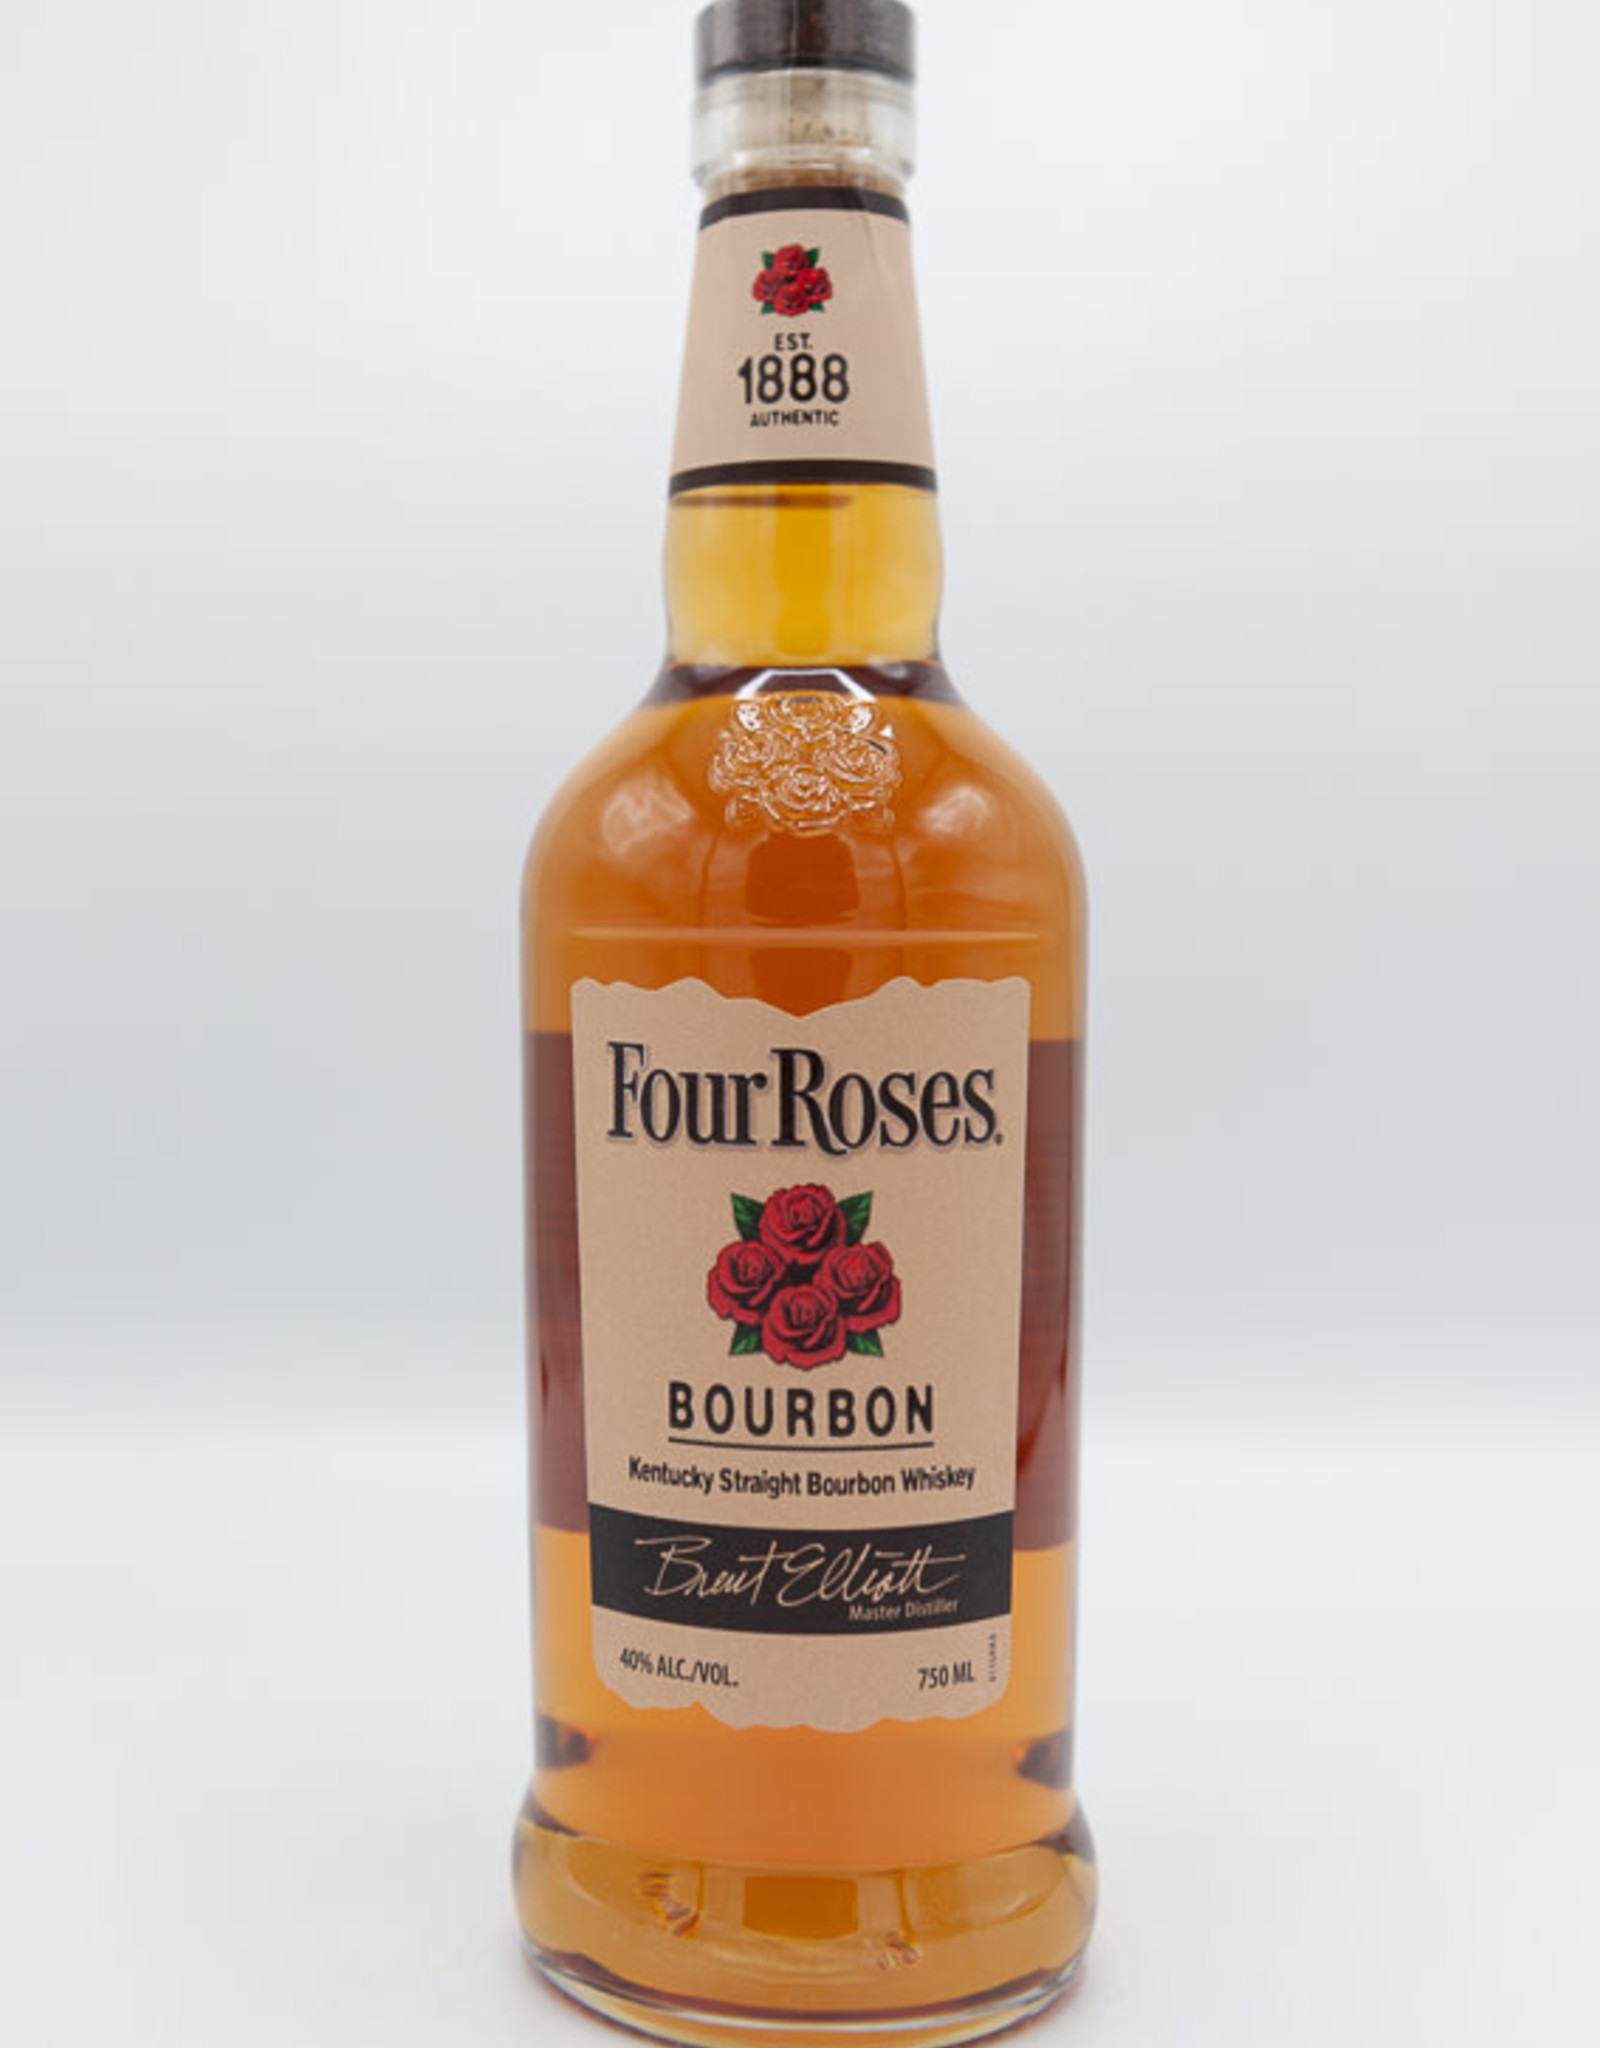 Four Roses Four Roses "Yellow Label" Bourbon